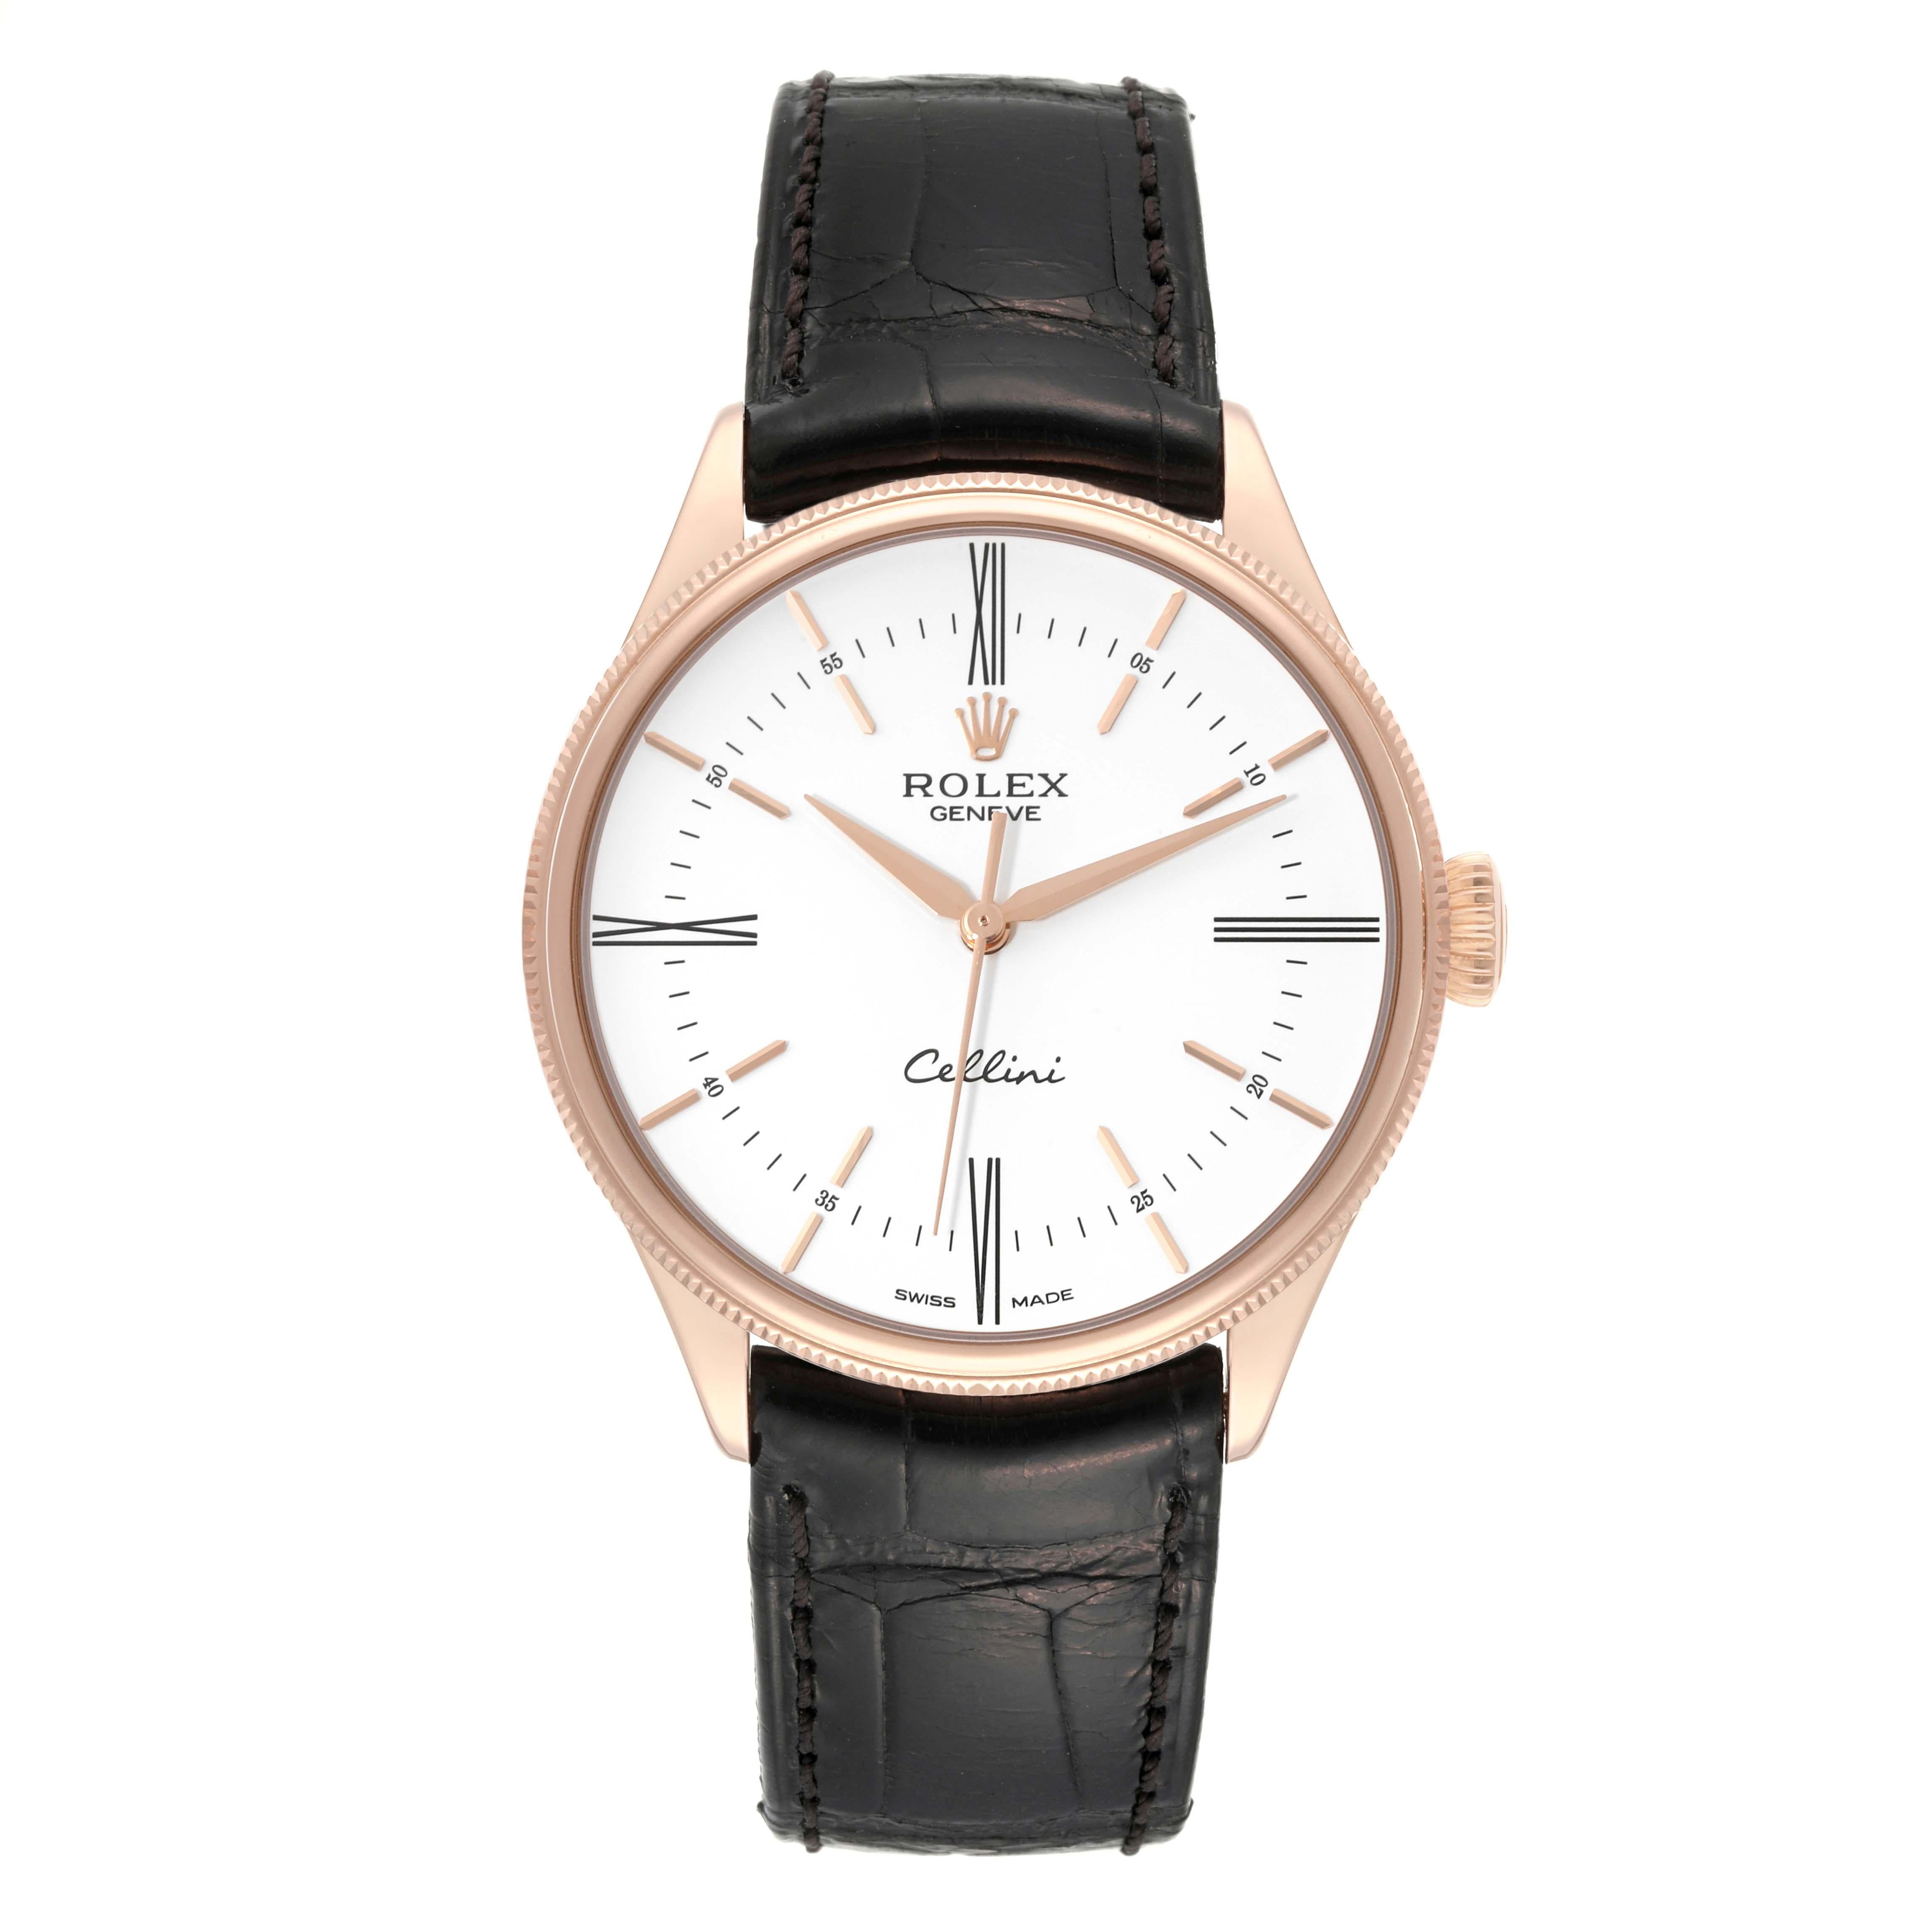 Rolex Cellini Time White Dial Rose Gold Mens Watch 50505 Box Card. Automatic self-winding movement. Officially certified Swiss chronometer (COSC). Paramagnetic blue Parachrom hairspring. Bidirectional self-winding via Perpetual rotor. 18K rose gold